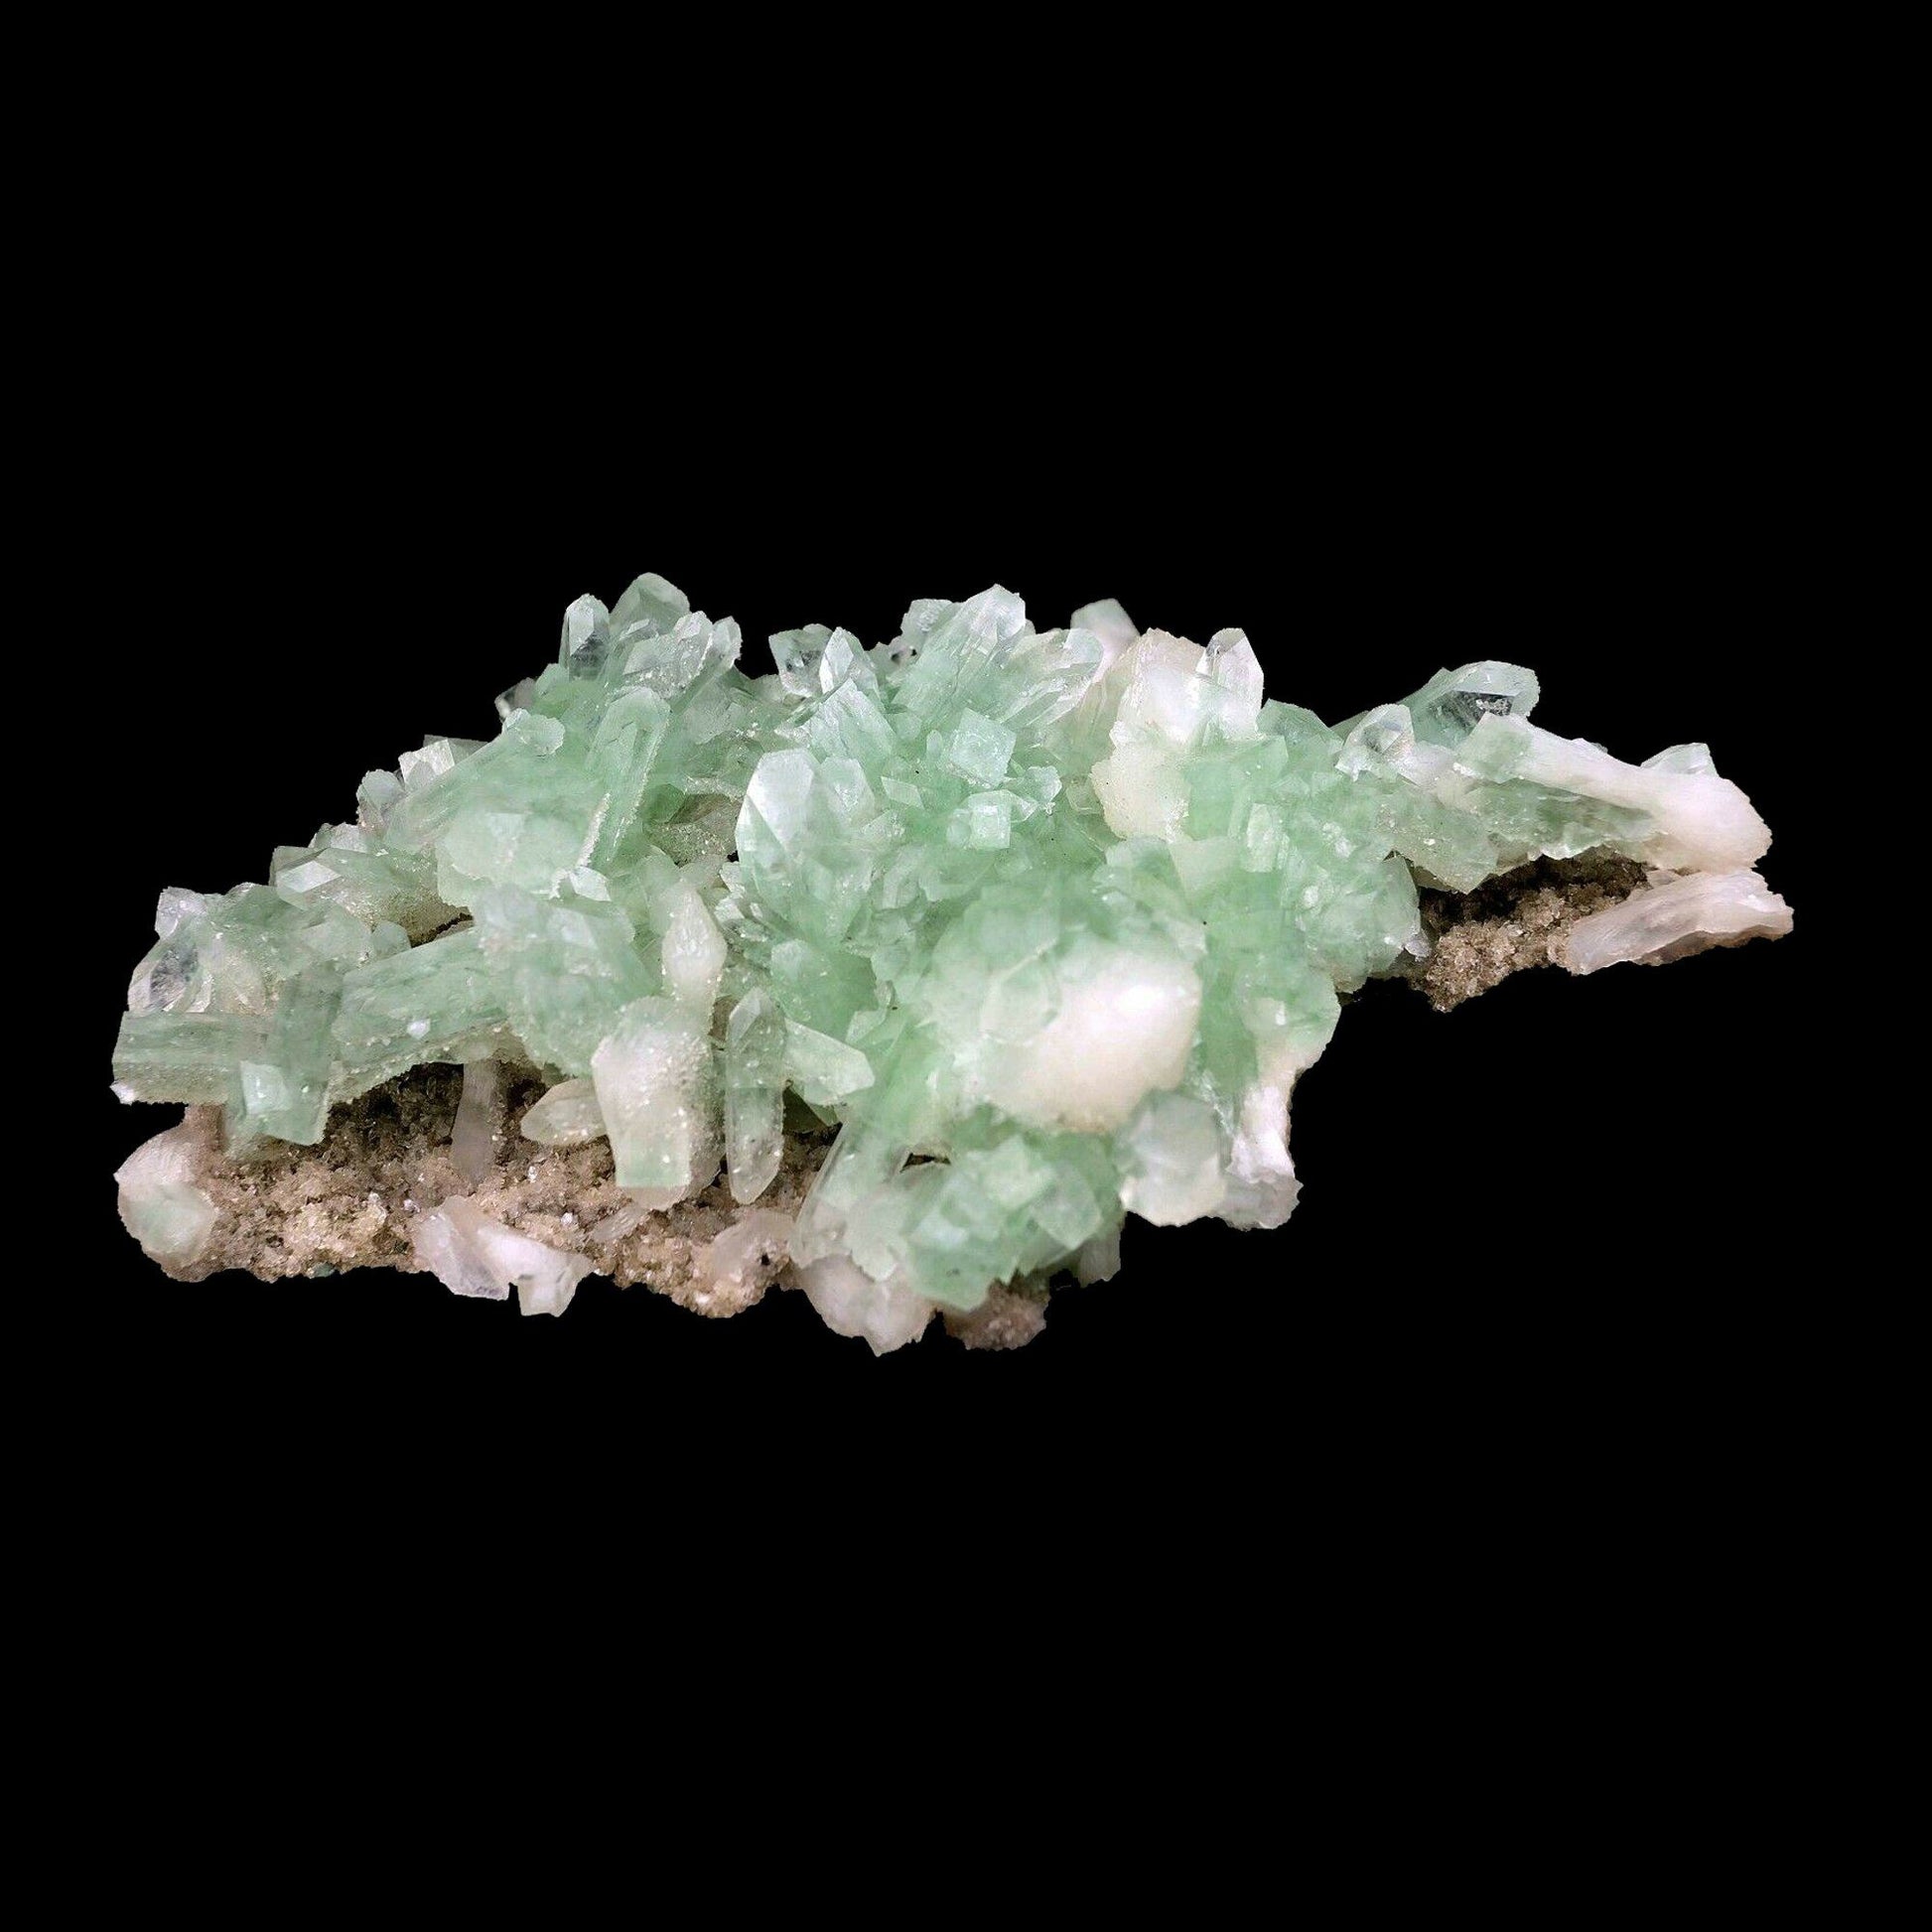 Apophyllite green crystal with Stilbite Natural Mineral Specimen # B 3…  https://www.superbminerals.us/products/apophyllite-green-crystal-with-stilbite-natural-mineral-specimen-b-3568  Features:A splendid green, light-green, radiant layer of Apophyllite precious stones with Stilbite on top of it which makes an ice impact . With a more intensive look, the precious stone development and shading contrast between the two ages of stilbite is insane. The mix, state of example and difference alongside